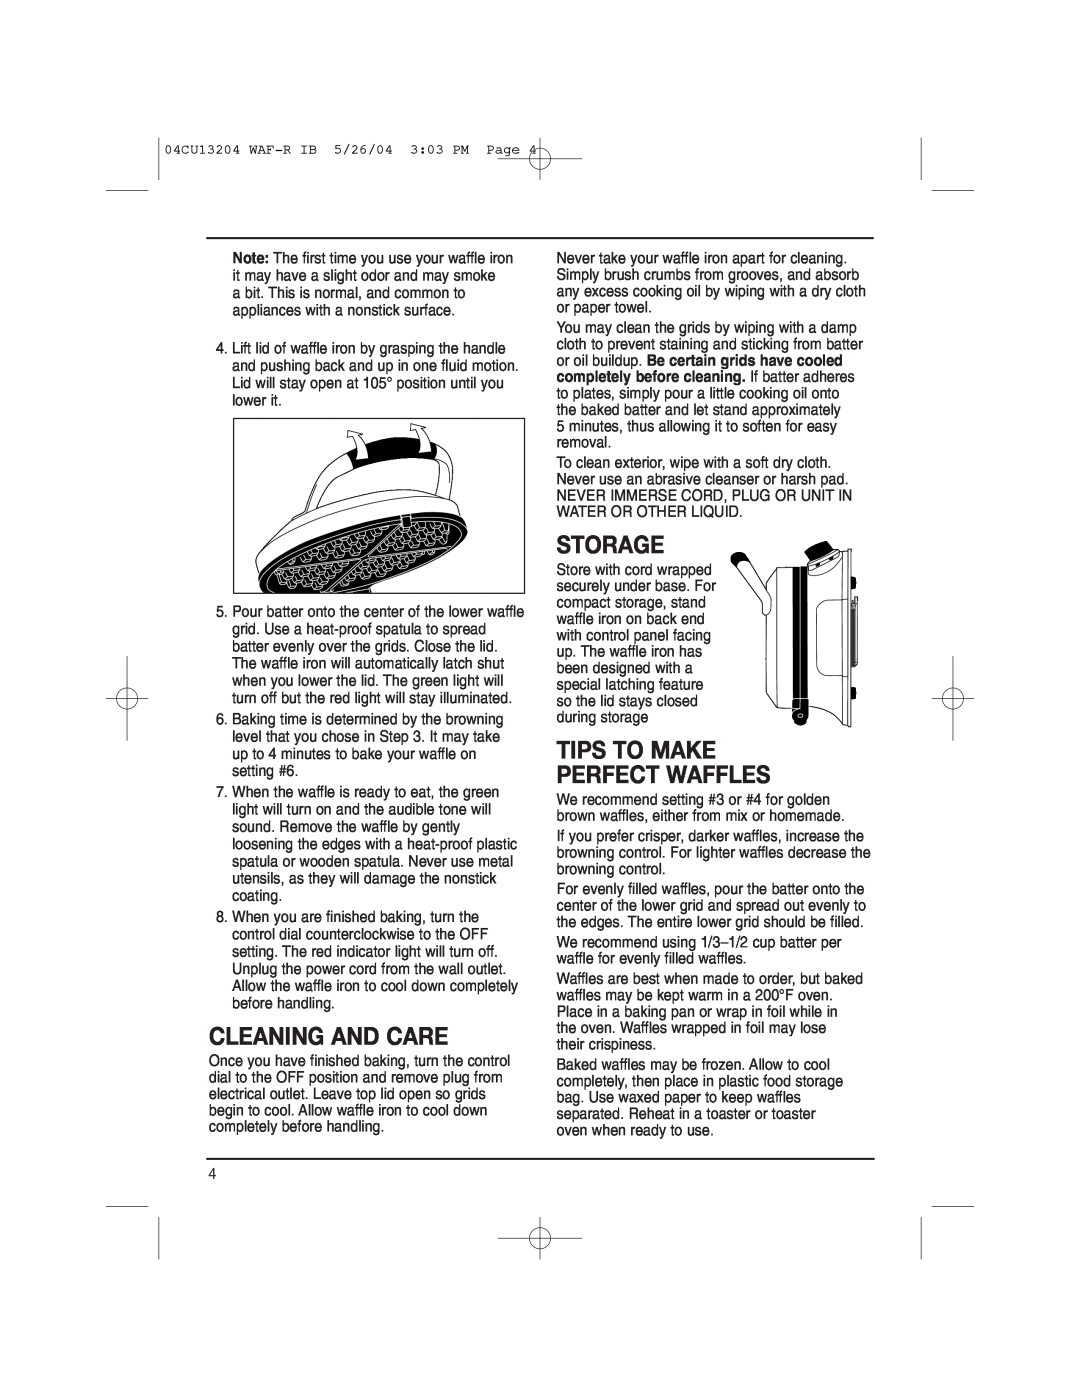 Cuisinart WAF-R manual Cleaning And Care, Storage, Tips To Make Perfect Waffles 